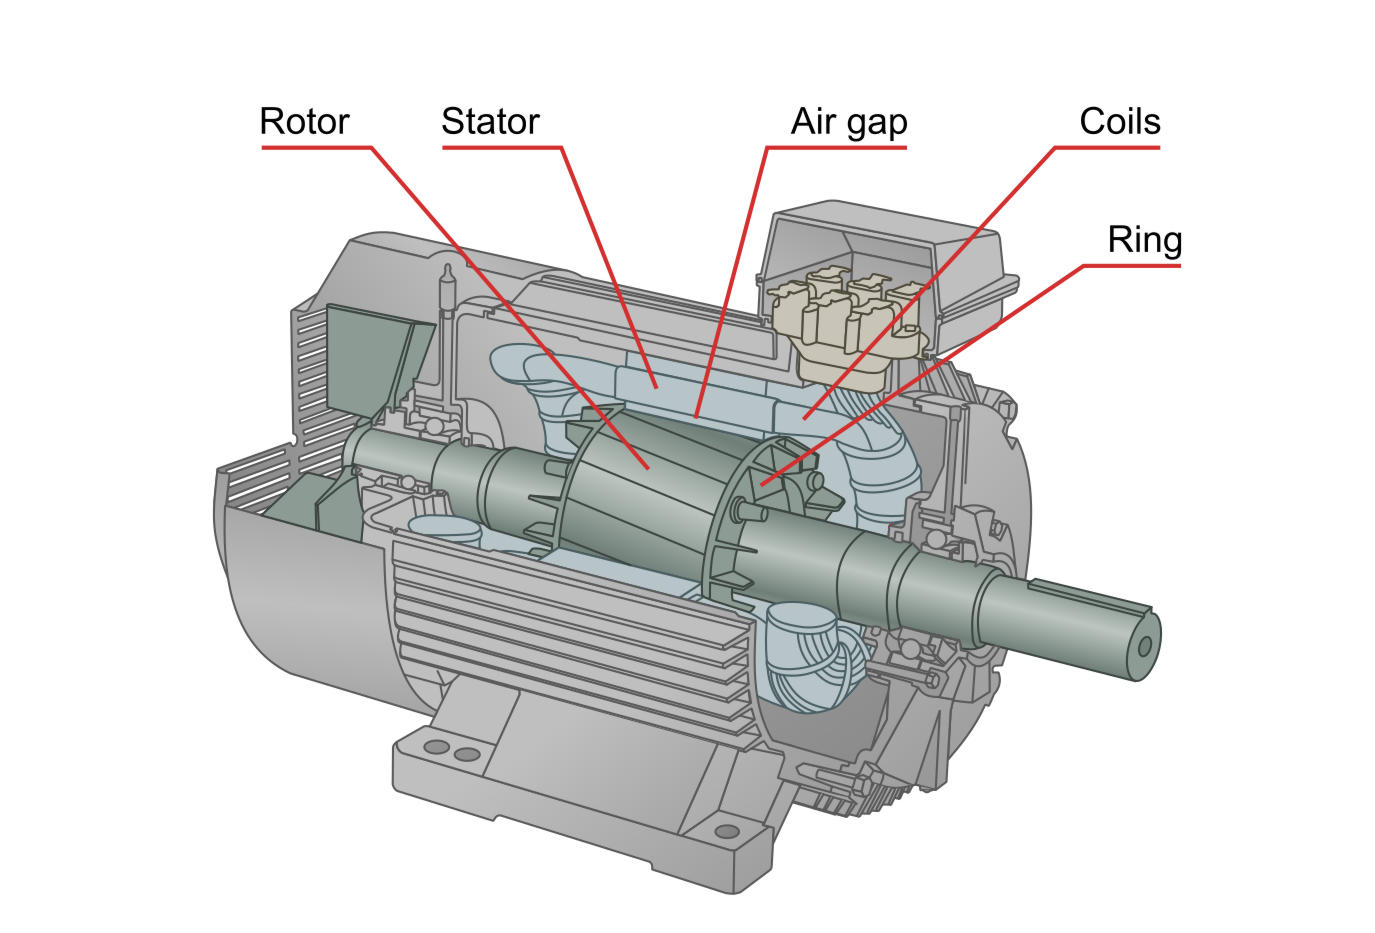 Figure 10.2: Components of an AC induction motor